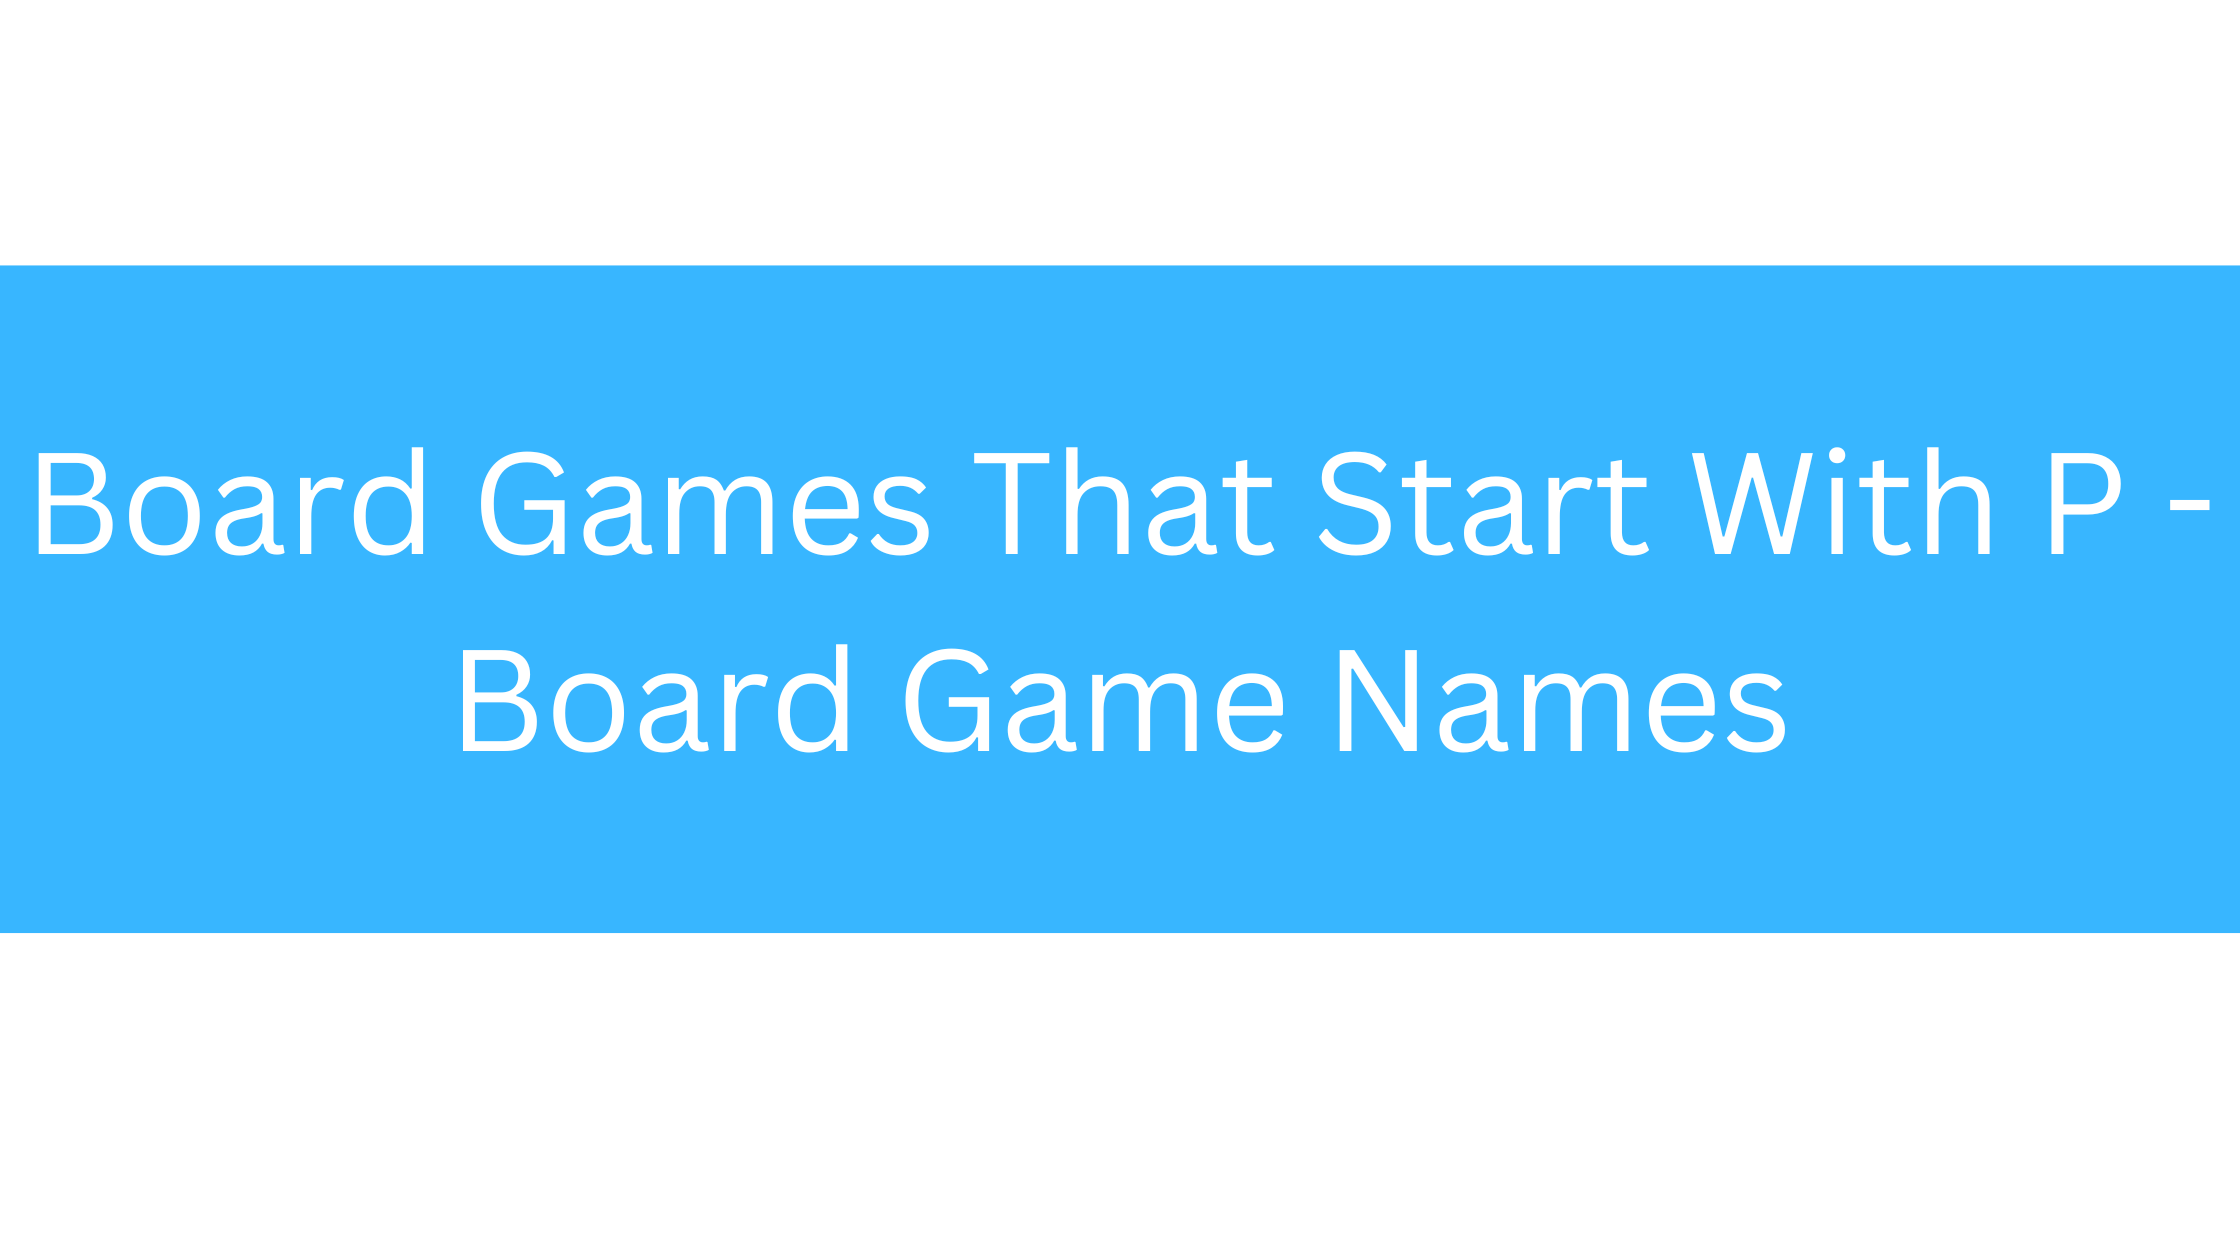 Board Games That Start With P